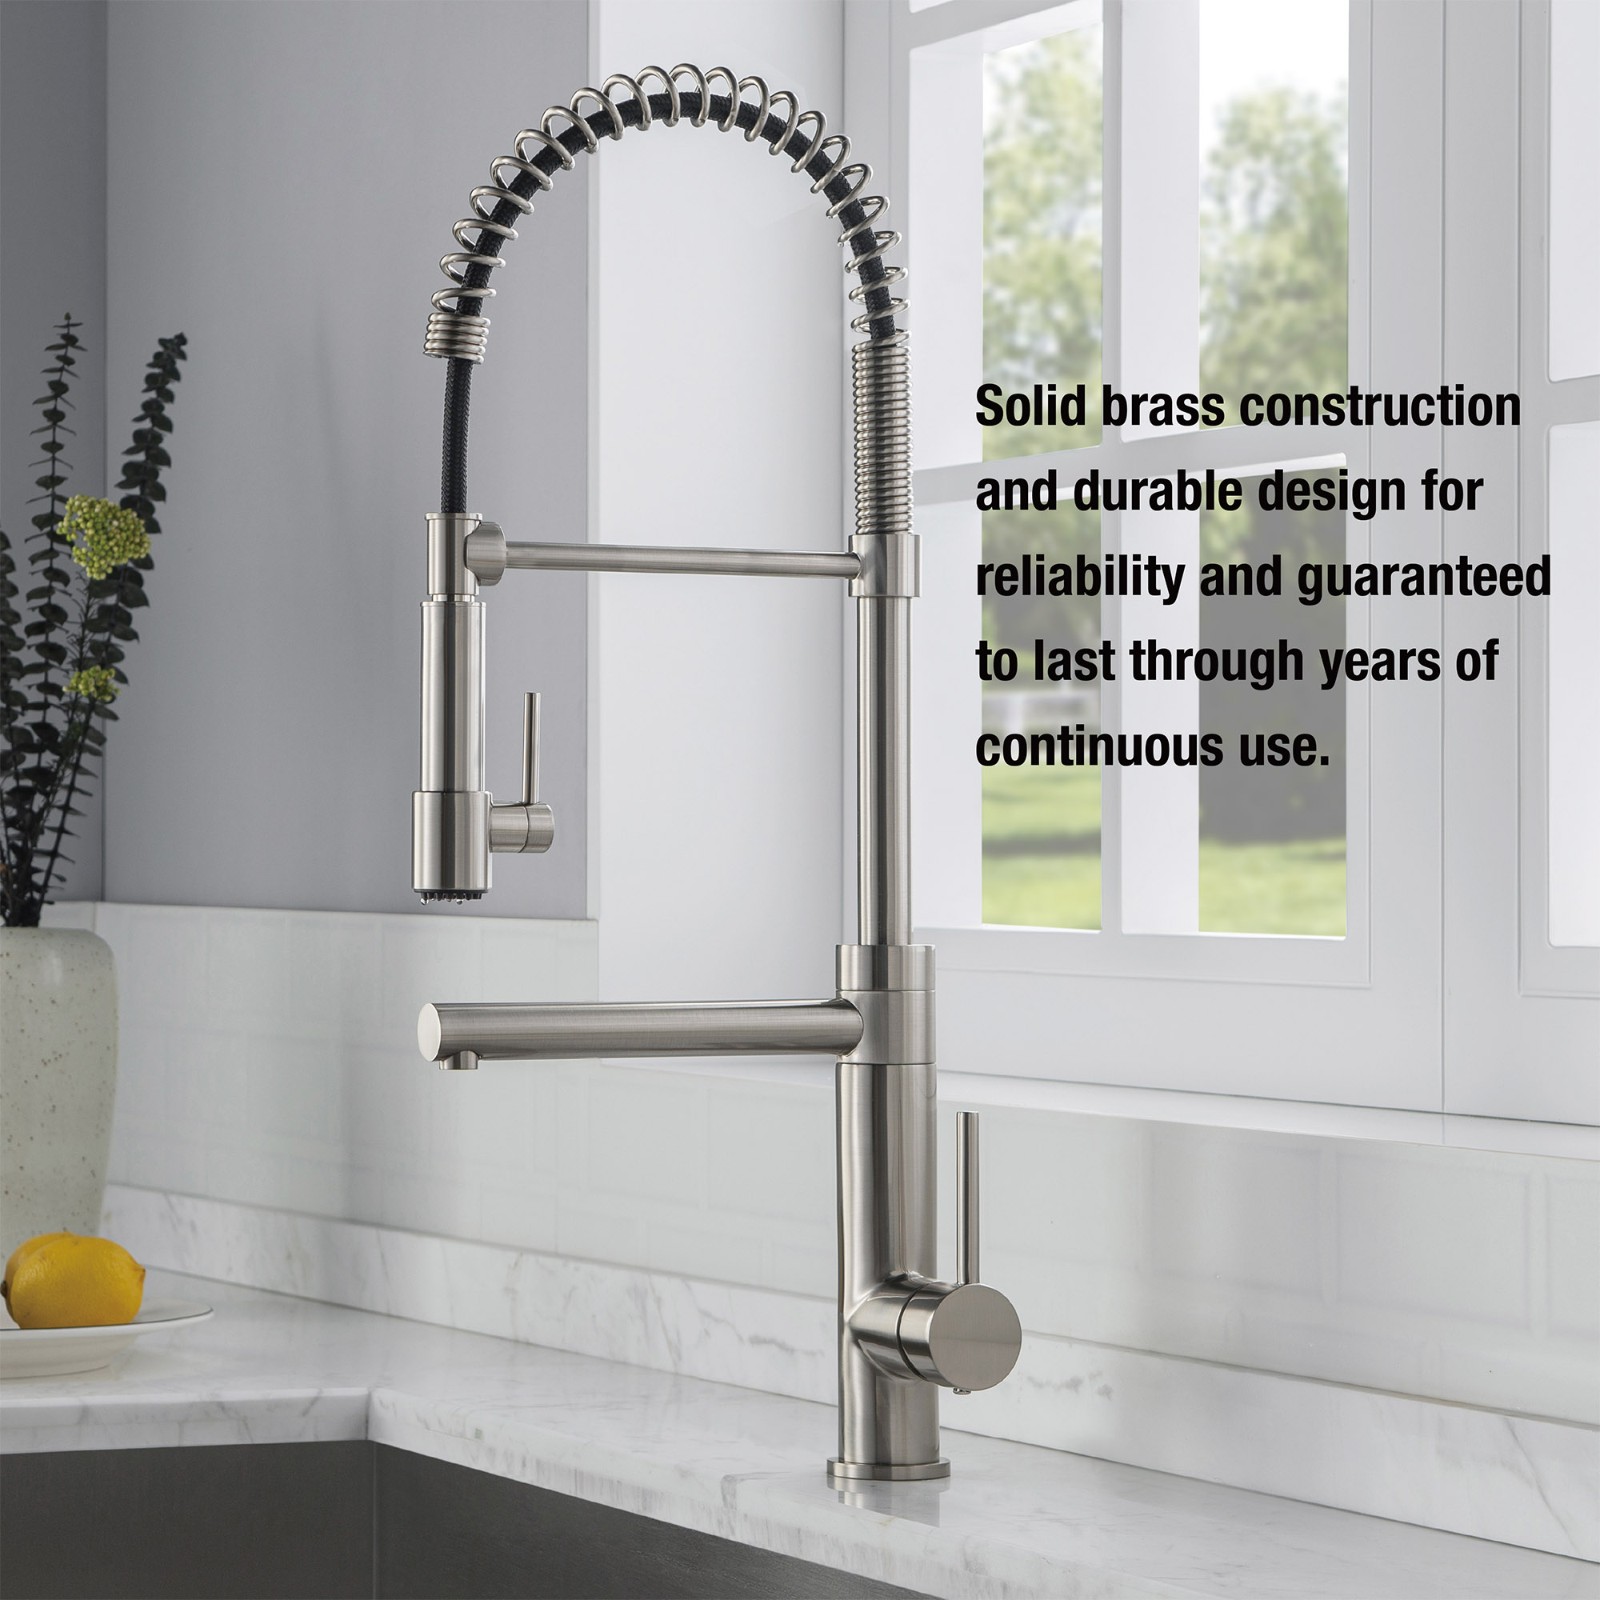  WOODBRIDGE WK060501BN Stainless Steel Single Handle Pre-Rinse Pull Down Kitchen Faucet and Pot Filler in Brushed Nickel Finish._5240